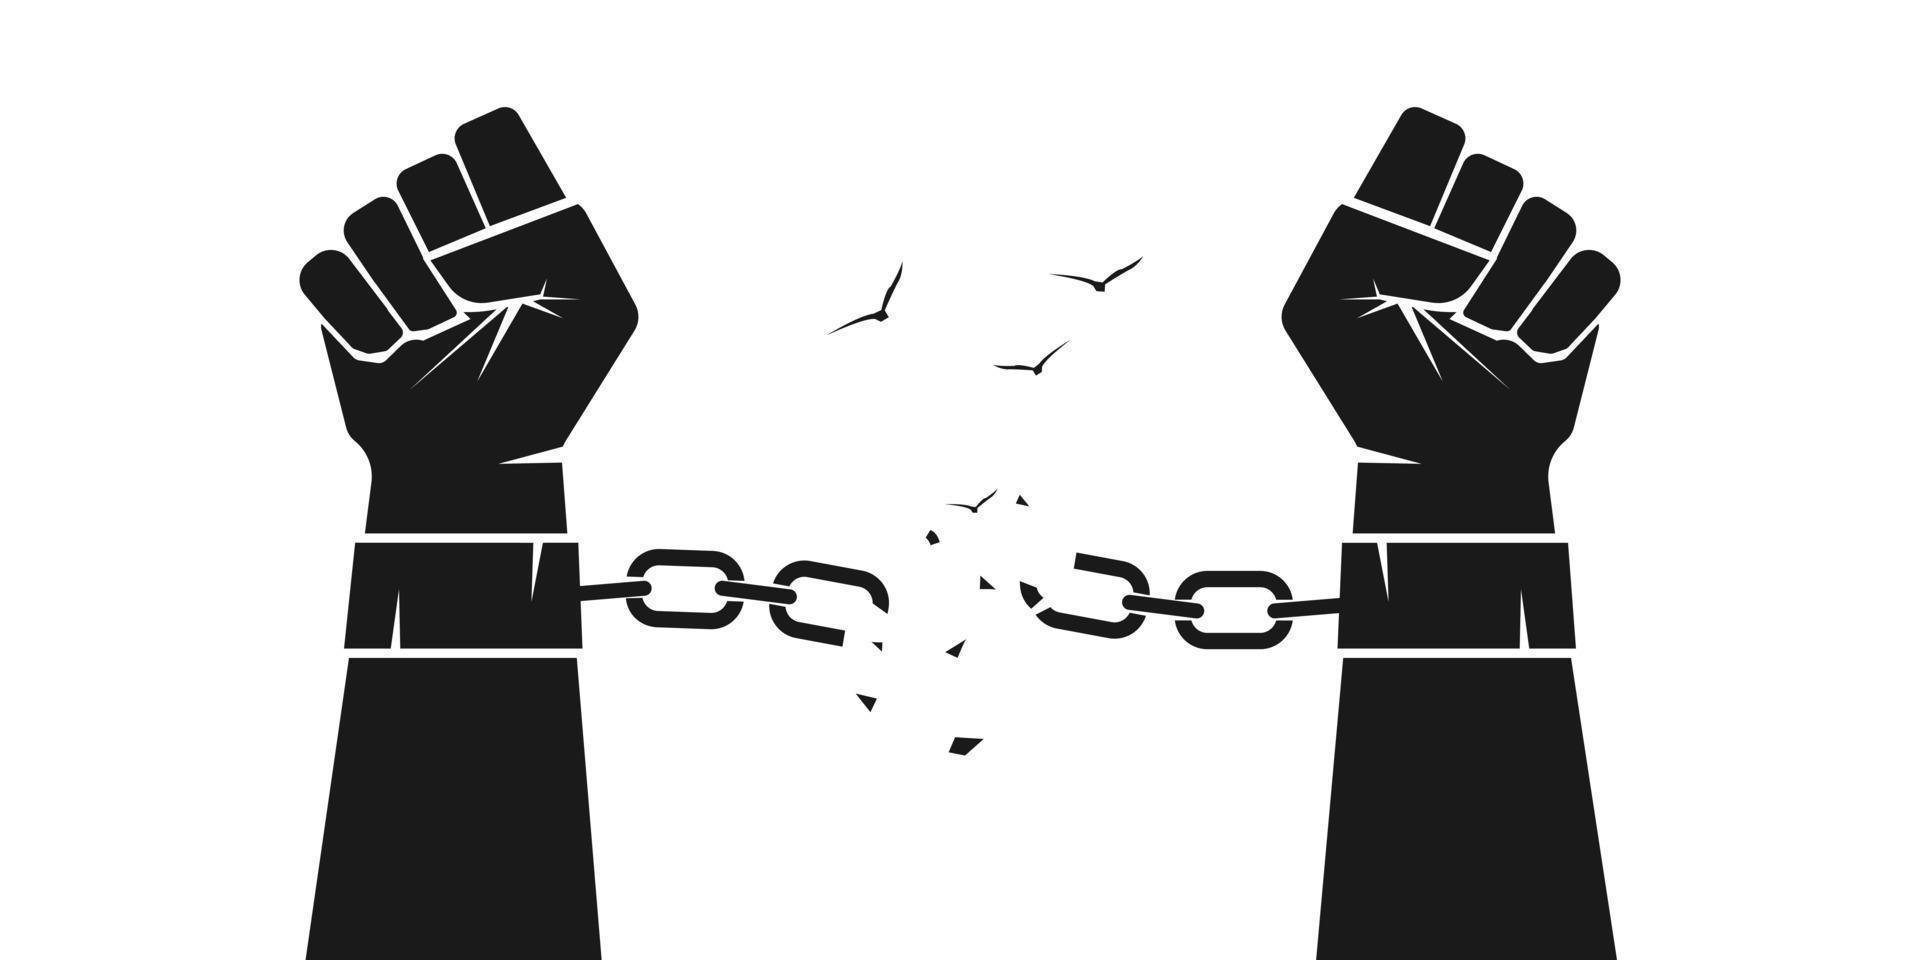 Hands are breaking steel handcuffs. Broken chains, shackles. Freedom concept. Isolated vector illustration.